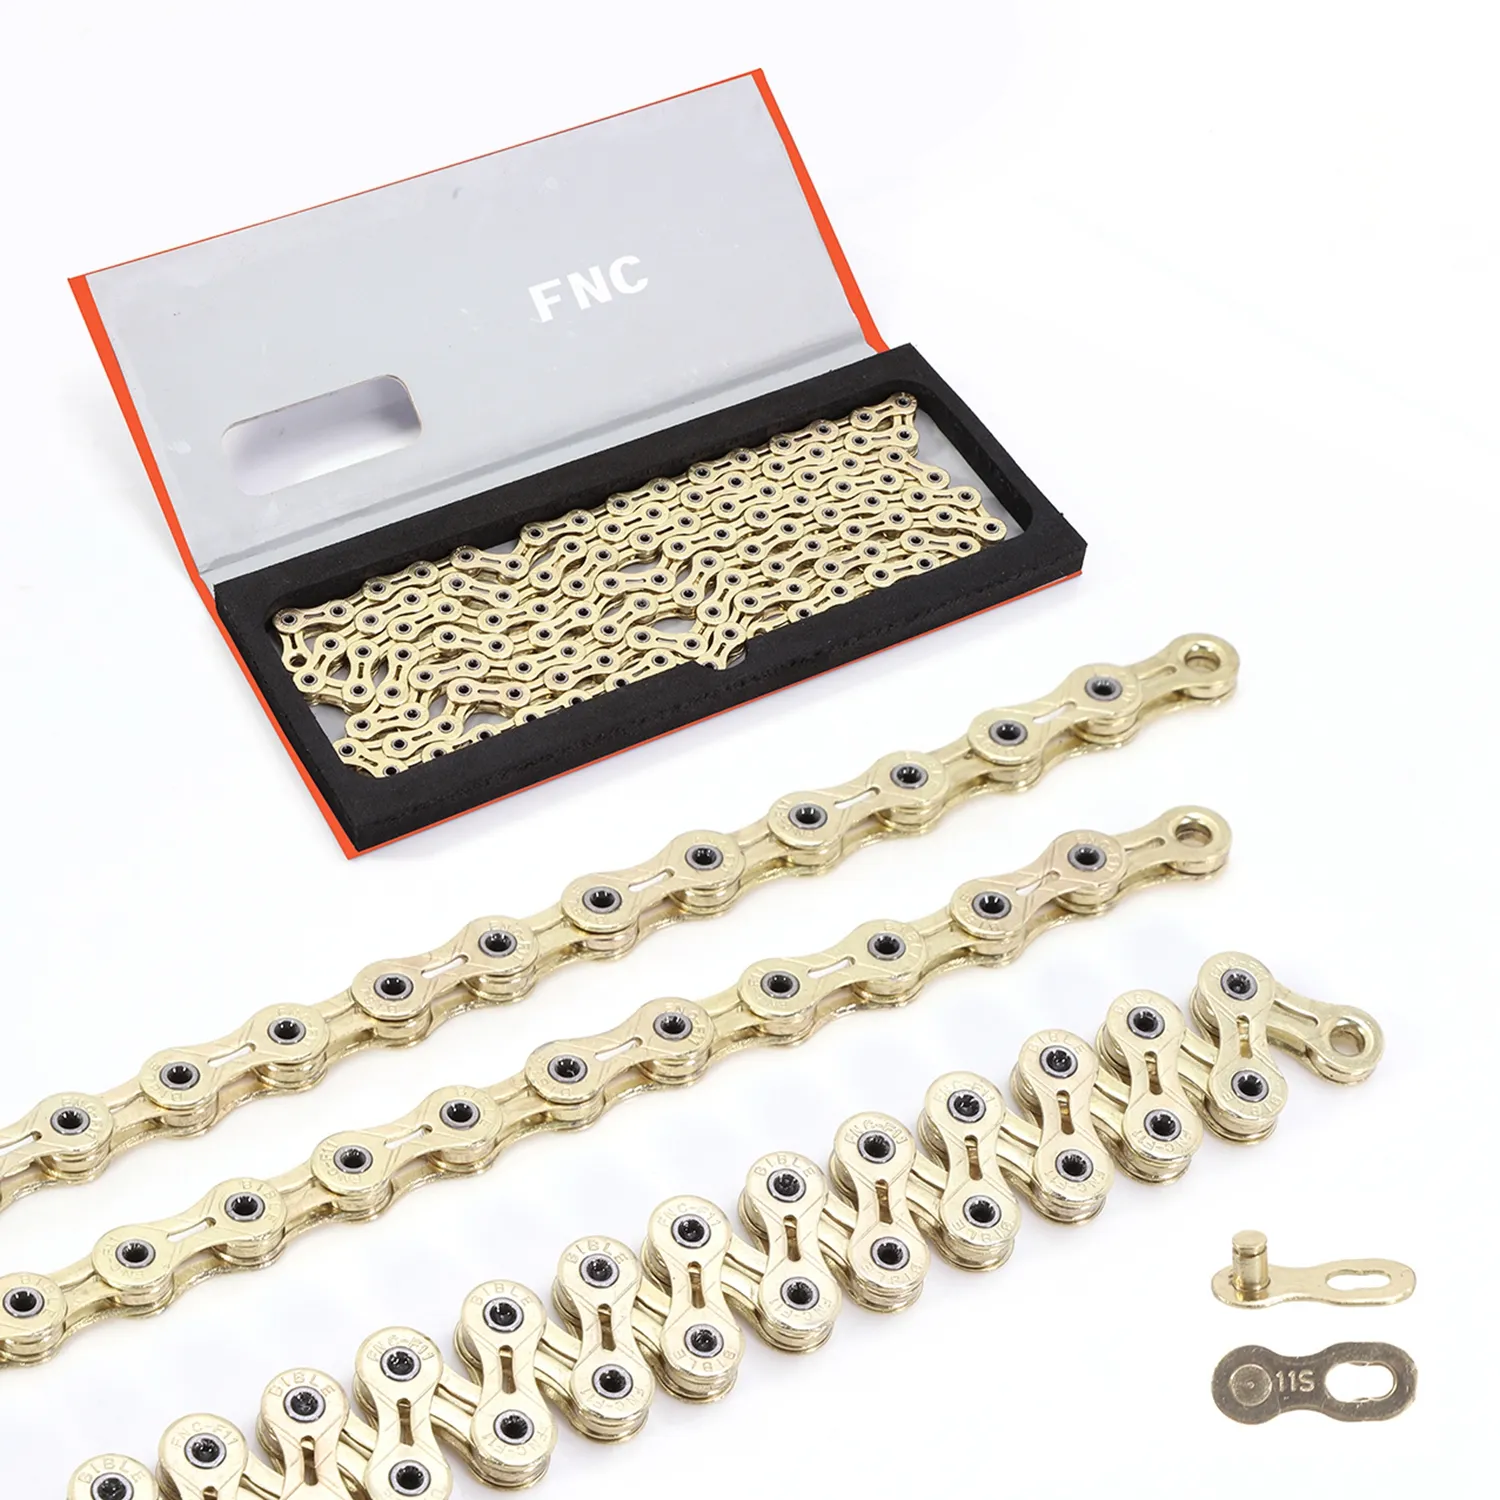 High quality FNC 11 speed golden antirust stainless steel hollow road mountain bike bicycle chain